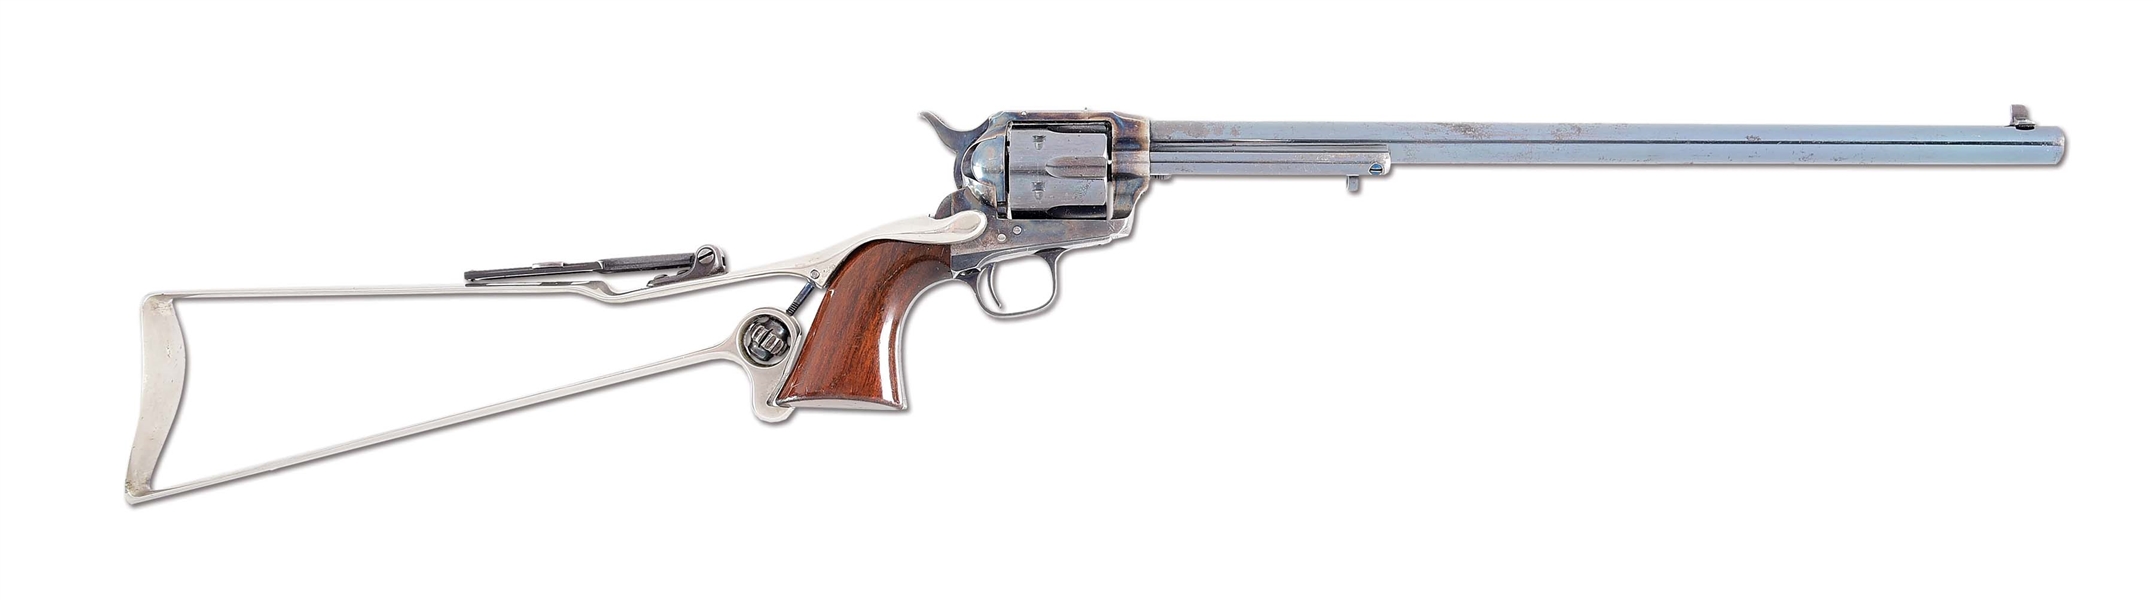 (A) Noted Collector Mel Guy's Legendary Colt "Buntline Special" Single Action Army Revolver